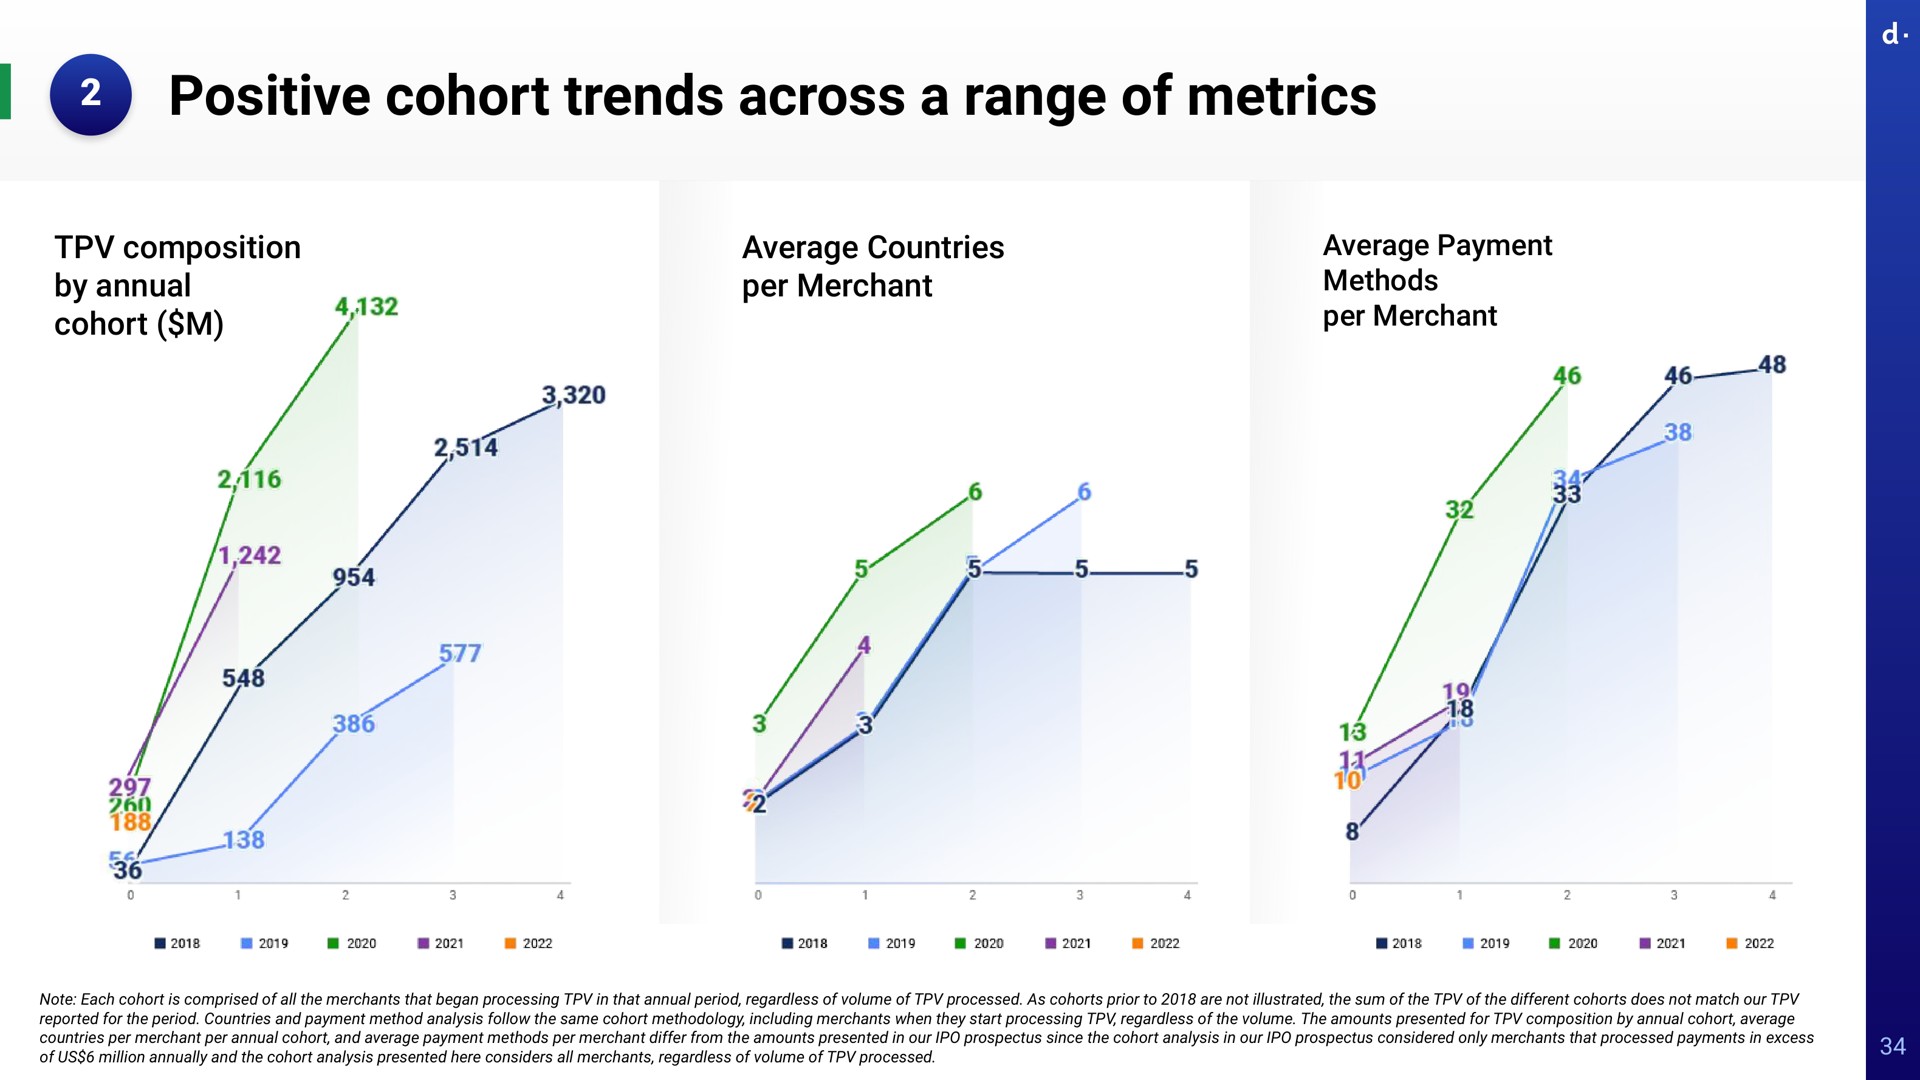 positive cohort trends across a range of metrics composition by annual cohort average countries per merchant average payment methods per merchant i note each is comprised all the merchants that began processing in that period regardless volume processed as cohorts prior to are not illustrated the sum the the different cohorts does not match our reported for the period and method analysis follow the same methodology including merchants when they start processing regardless the volume the amounts presented for and differ from the amounts presented in our prospectus since the analysis in our prospectus considered only merchants that processed payments in excess uss million annually and the analysis presented here considers all merchants regardless volume processed | dLocal